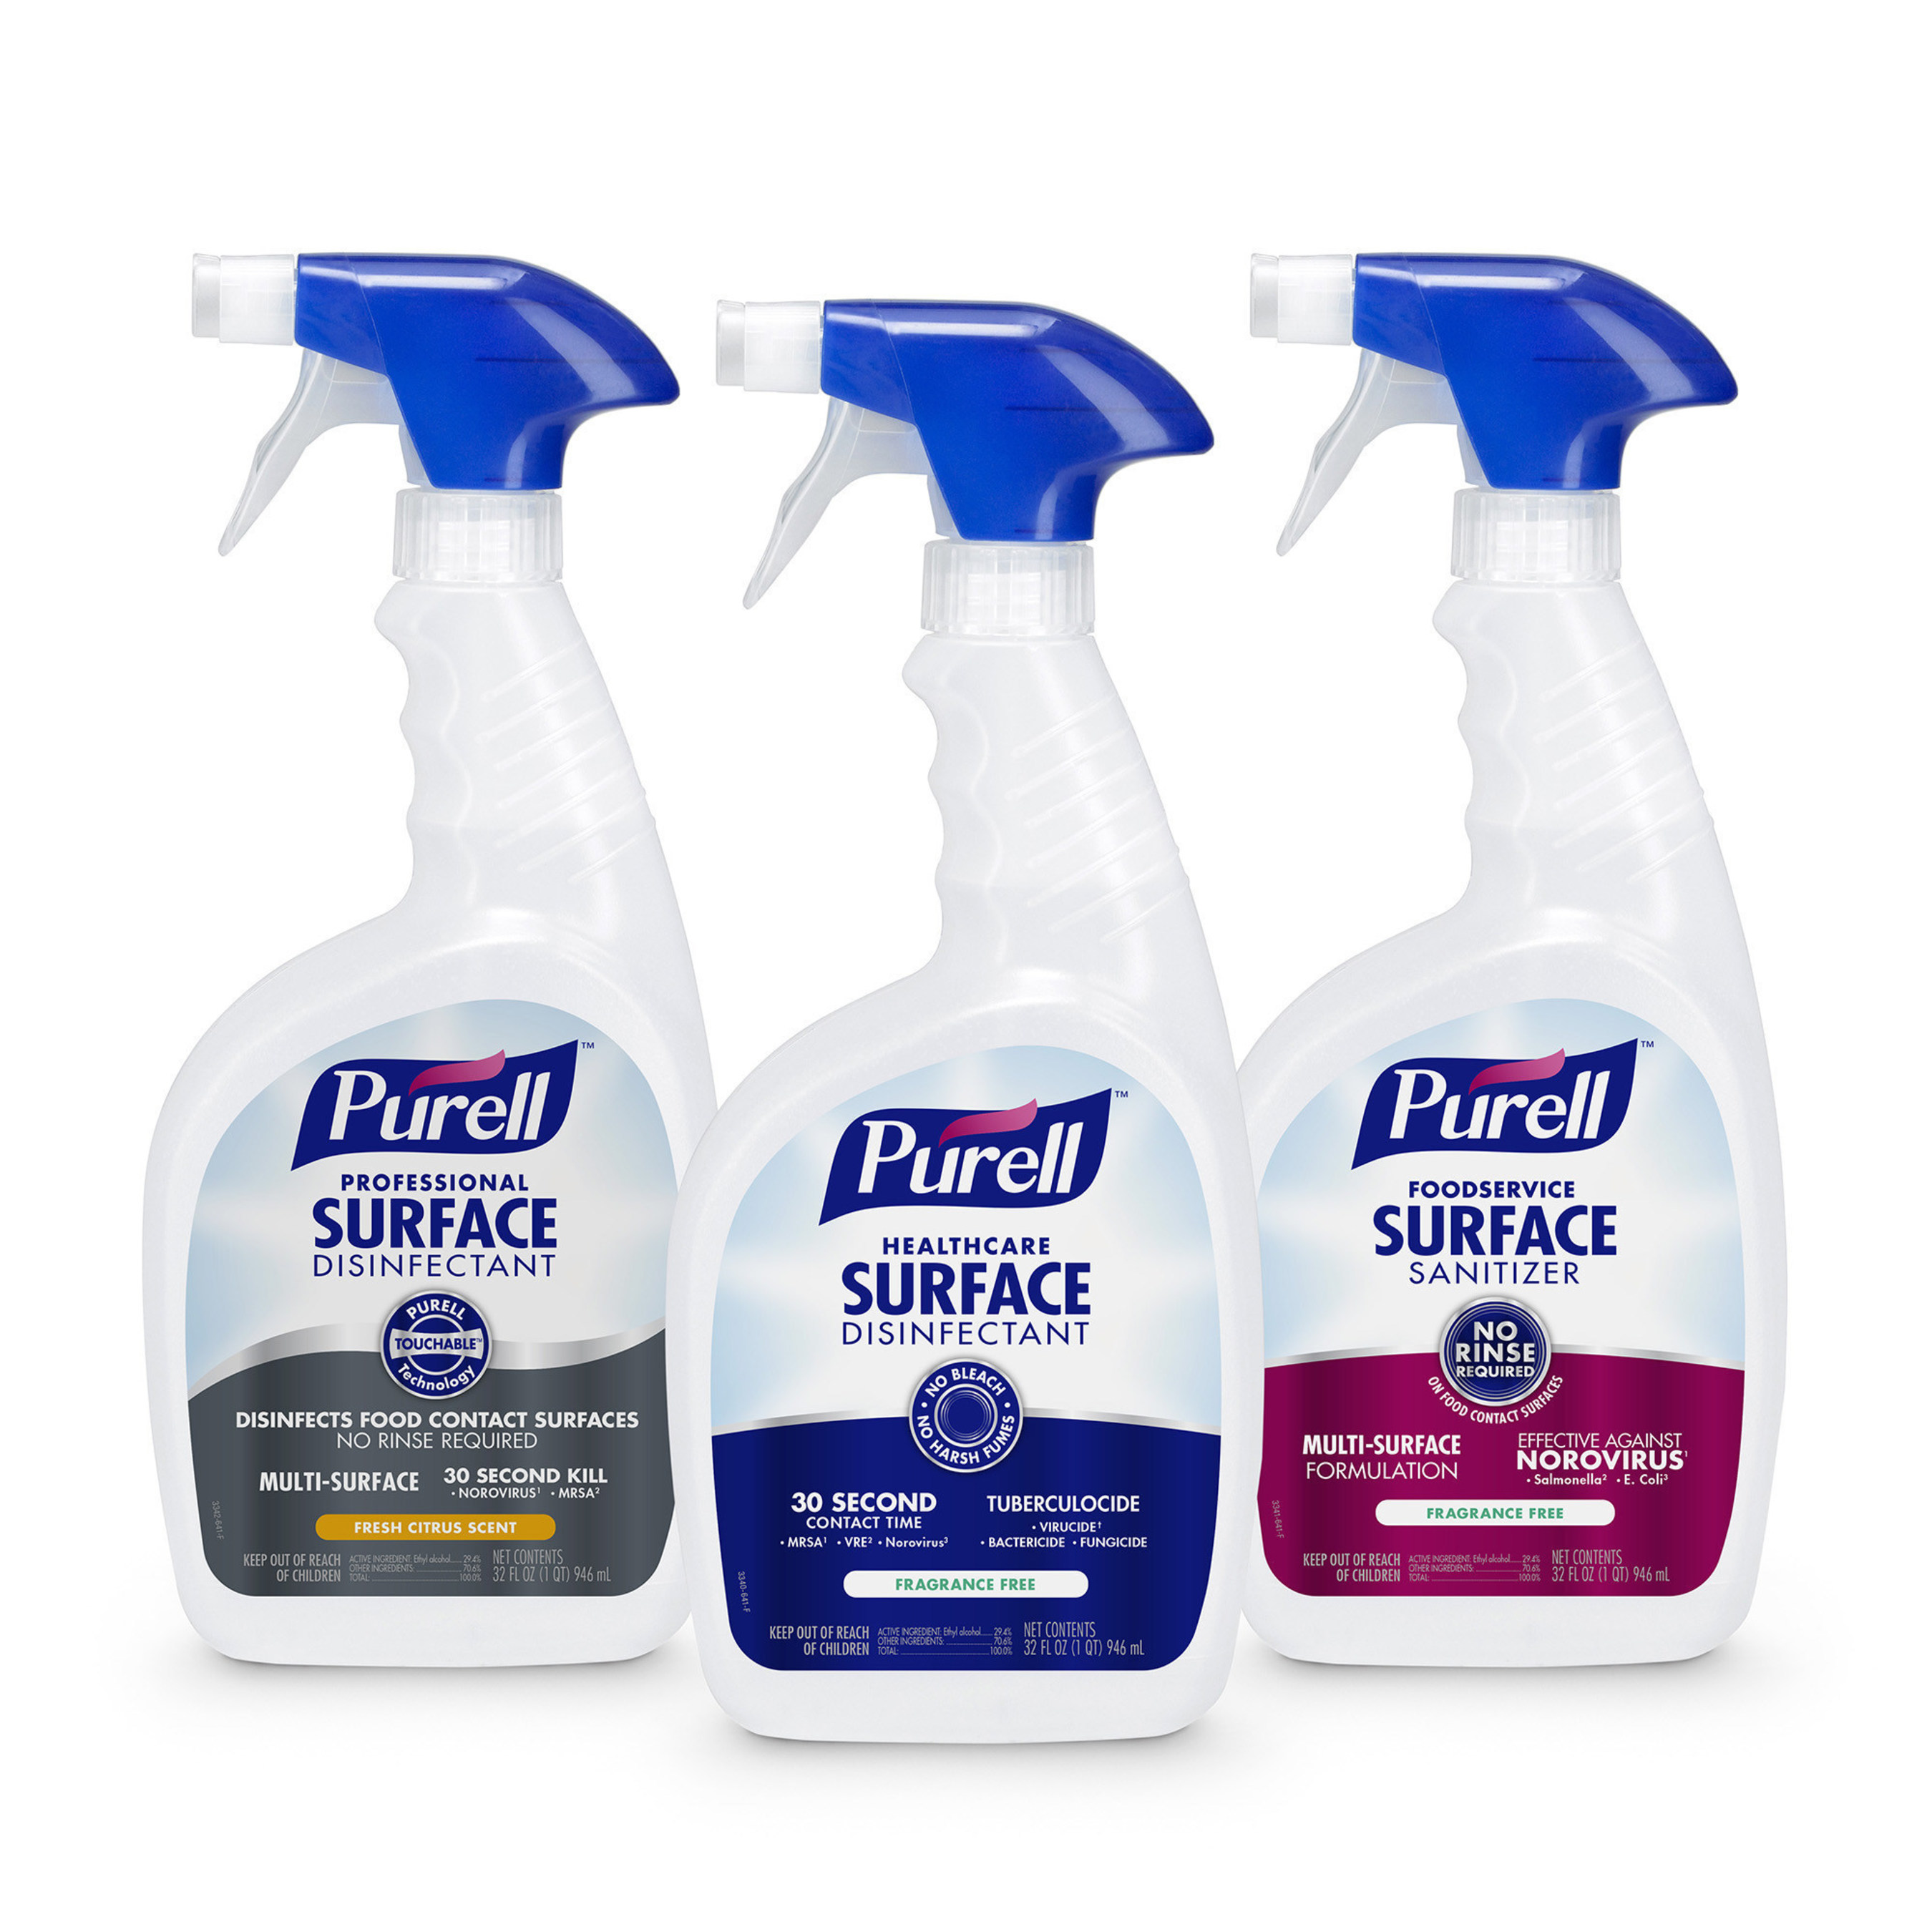 PURELL(TM) Surface Disinfecting and Sanitizing products are the latest innovation from GOJO, the inventors of PURELL(R) instant hand sanitizer and the global leader in hand hygiene solutions. The expansion of PURELL(TM) products into the surface disinfecting and sanitizing category reflect the GOJO commitment to delivering exceptional well-being solutions for people, surfaces and the environment. The PURELL(TM) brand, trusted by hospitals, schools and restaurants for decades, is introducing its new surface disinfecting and sanitizing sprays into the foodservice, healthcare and professional markets.  The new PURELL(tm) Surface Disinfecting and Sanitizing Products offer powerful germ kill for MRSA, the cold and flu virus and norovirus within 30 seconds, a no rinse food contact surface formula in addition to its Design for the Environment Certification.  The new PURELL(tm) Surface Spray products are available through GOJO distribution and online retailers. For where to buy information, go to www.purellsurface.co